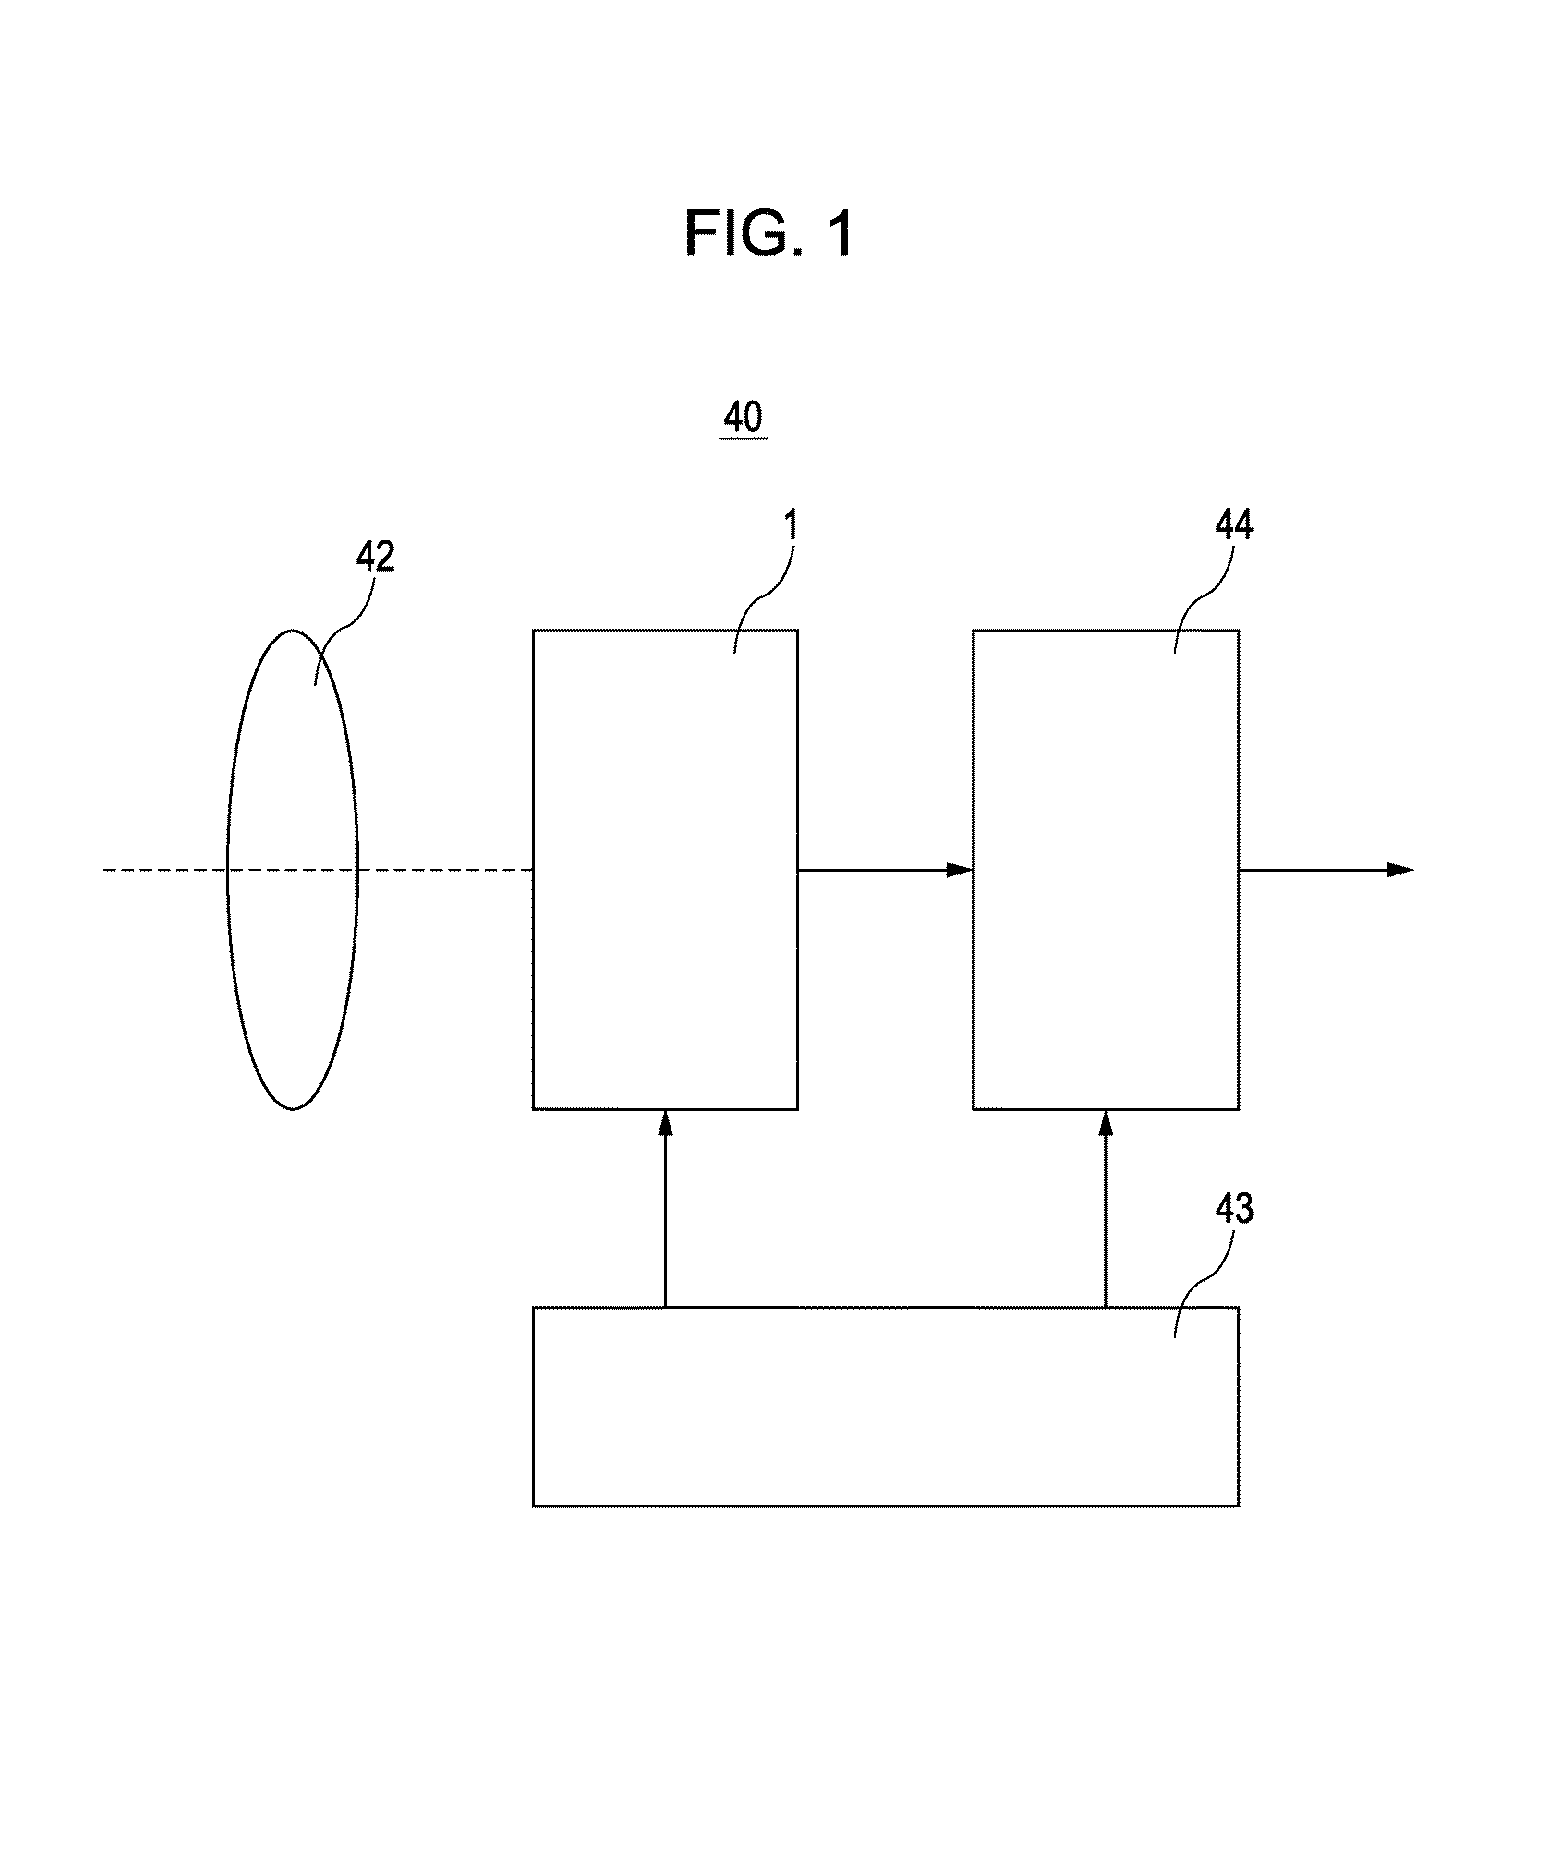 Solid-state imager, method of manufacturing the same, and camera